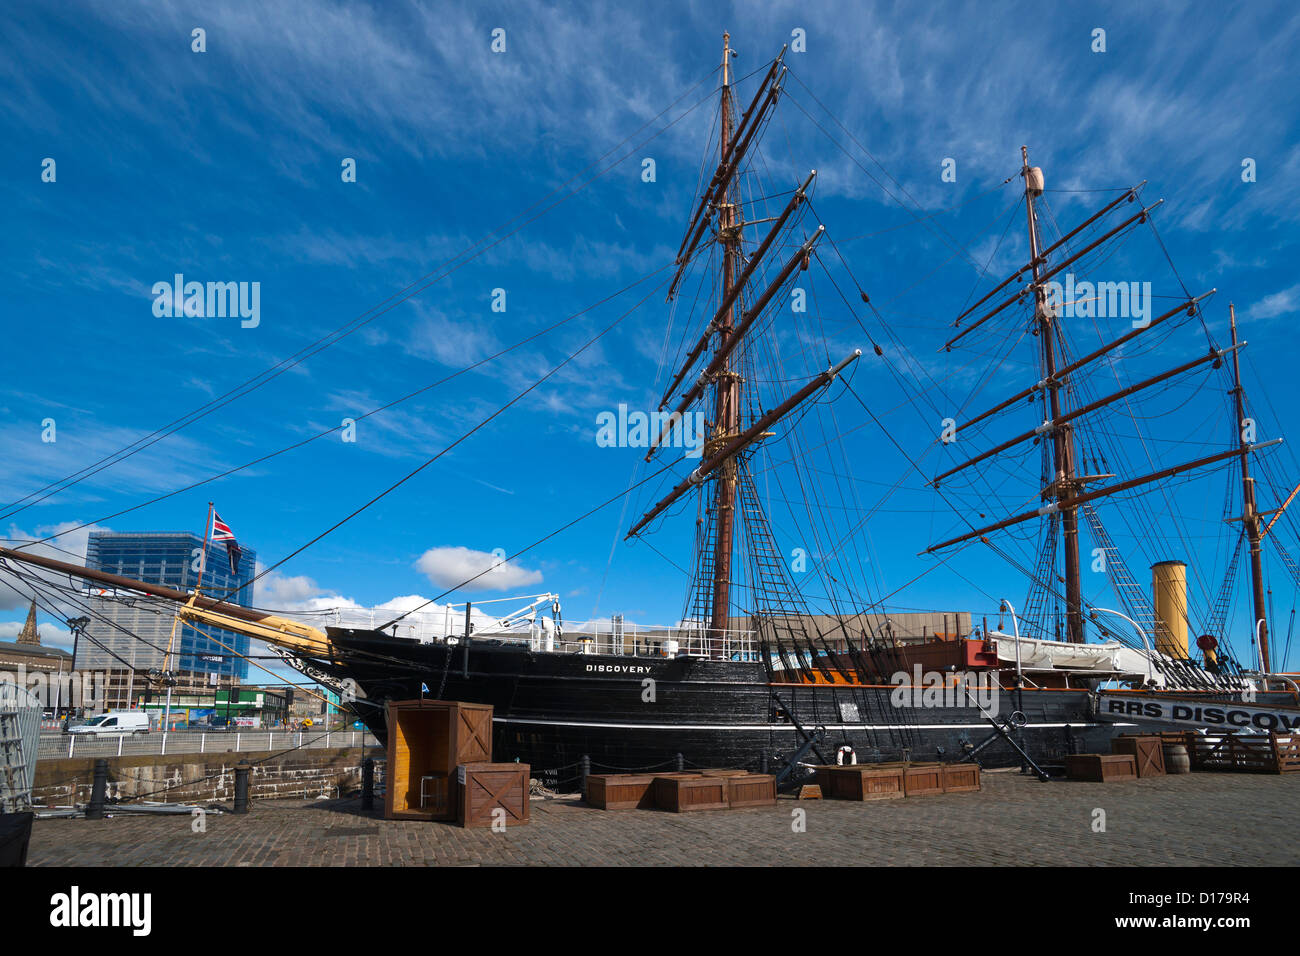 Discovery Point Visitor Centre, HMS / navire RRS, Dundee, Ecosse, Royaume-Uni Banque D'Images